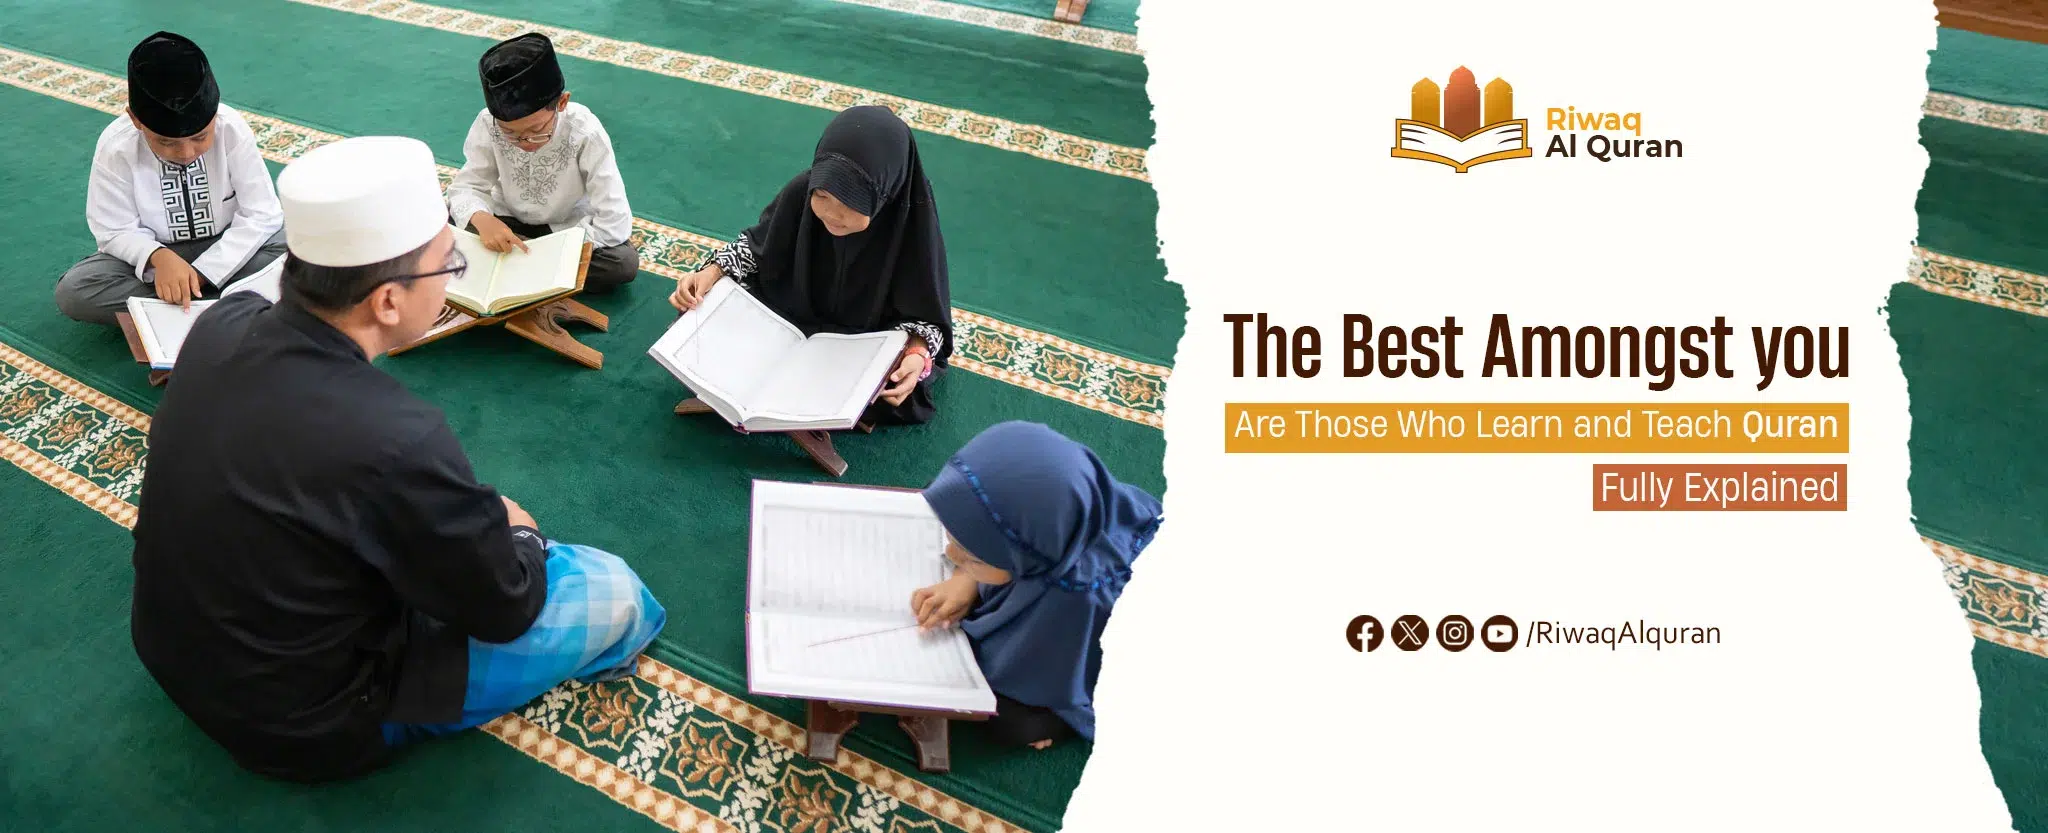 The Best Amongst You Are Those Who Learn and Teach Quran: Hadith Fully Explained